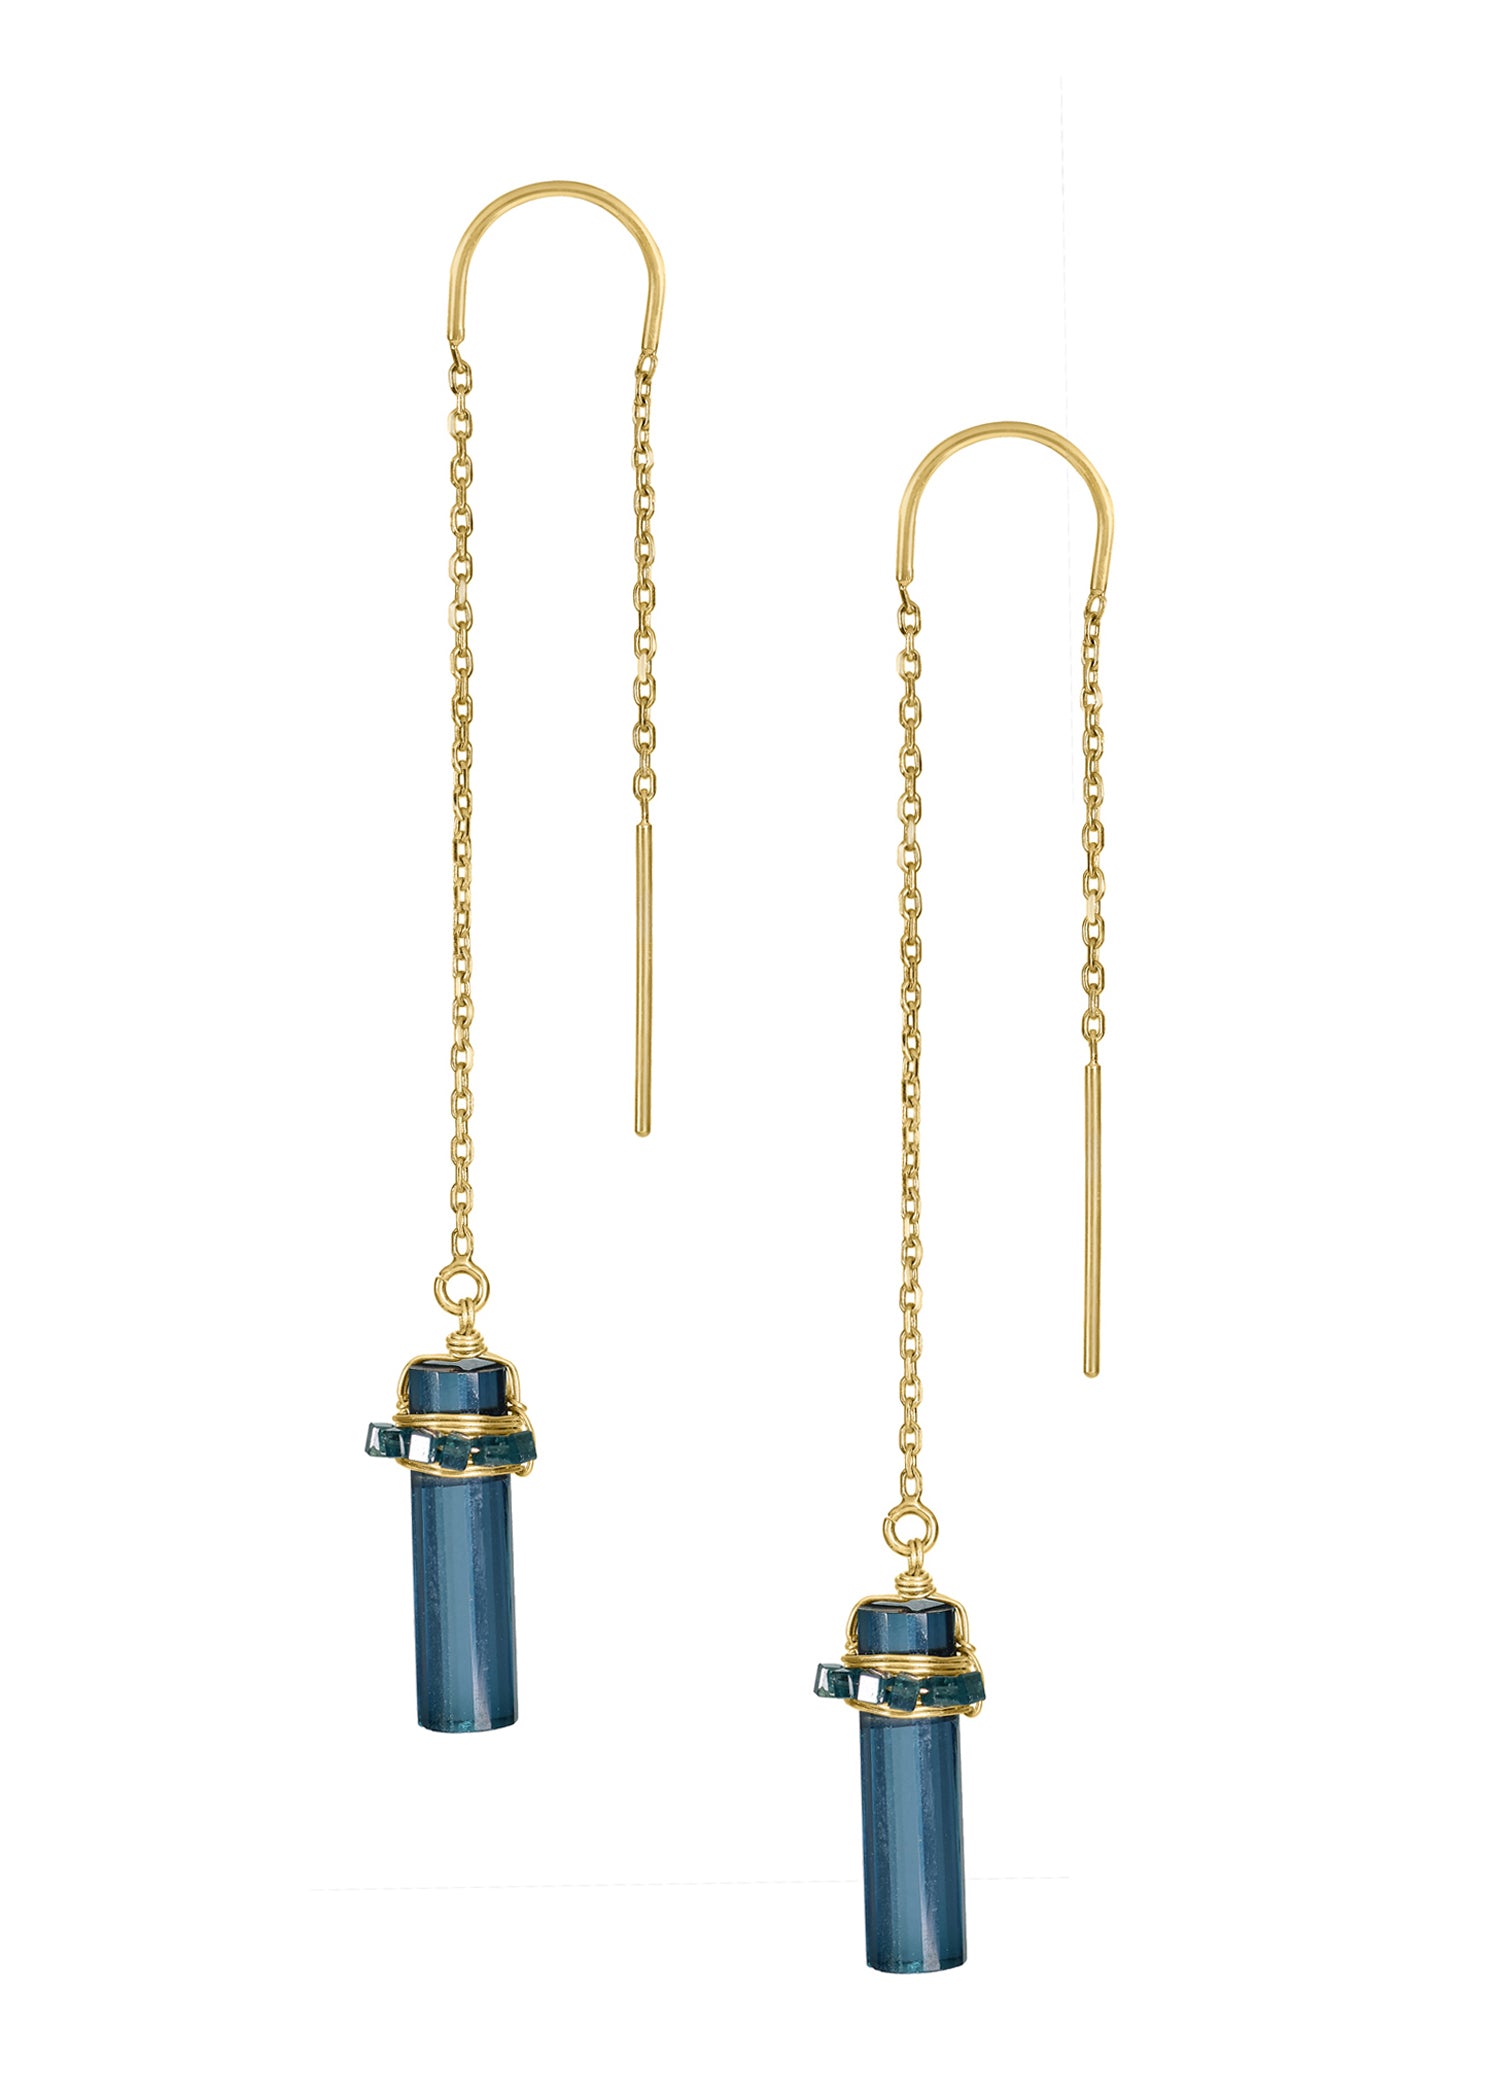 Diamond London blue quartz 14k gold Earrings measure 4" in length (including ear wires) and 3/16" in width Handmade in our Los Angeles studio